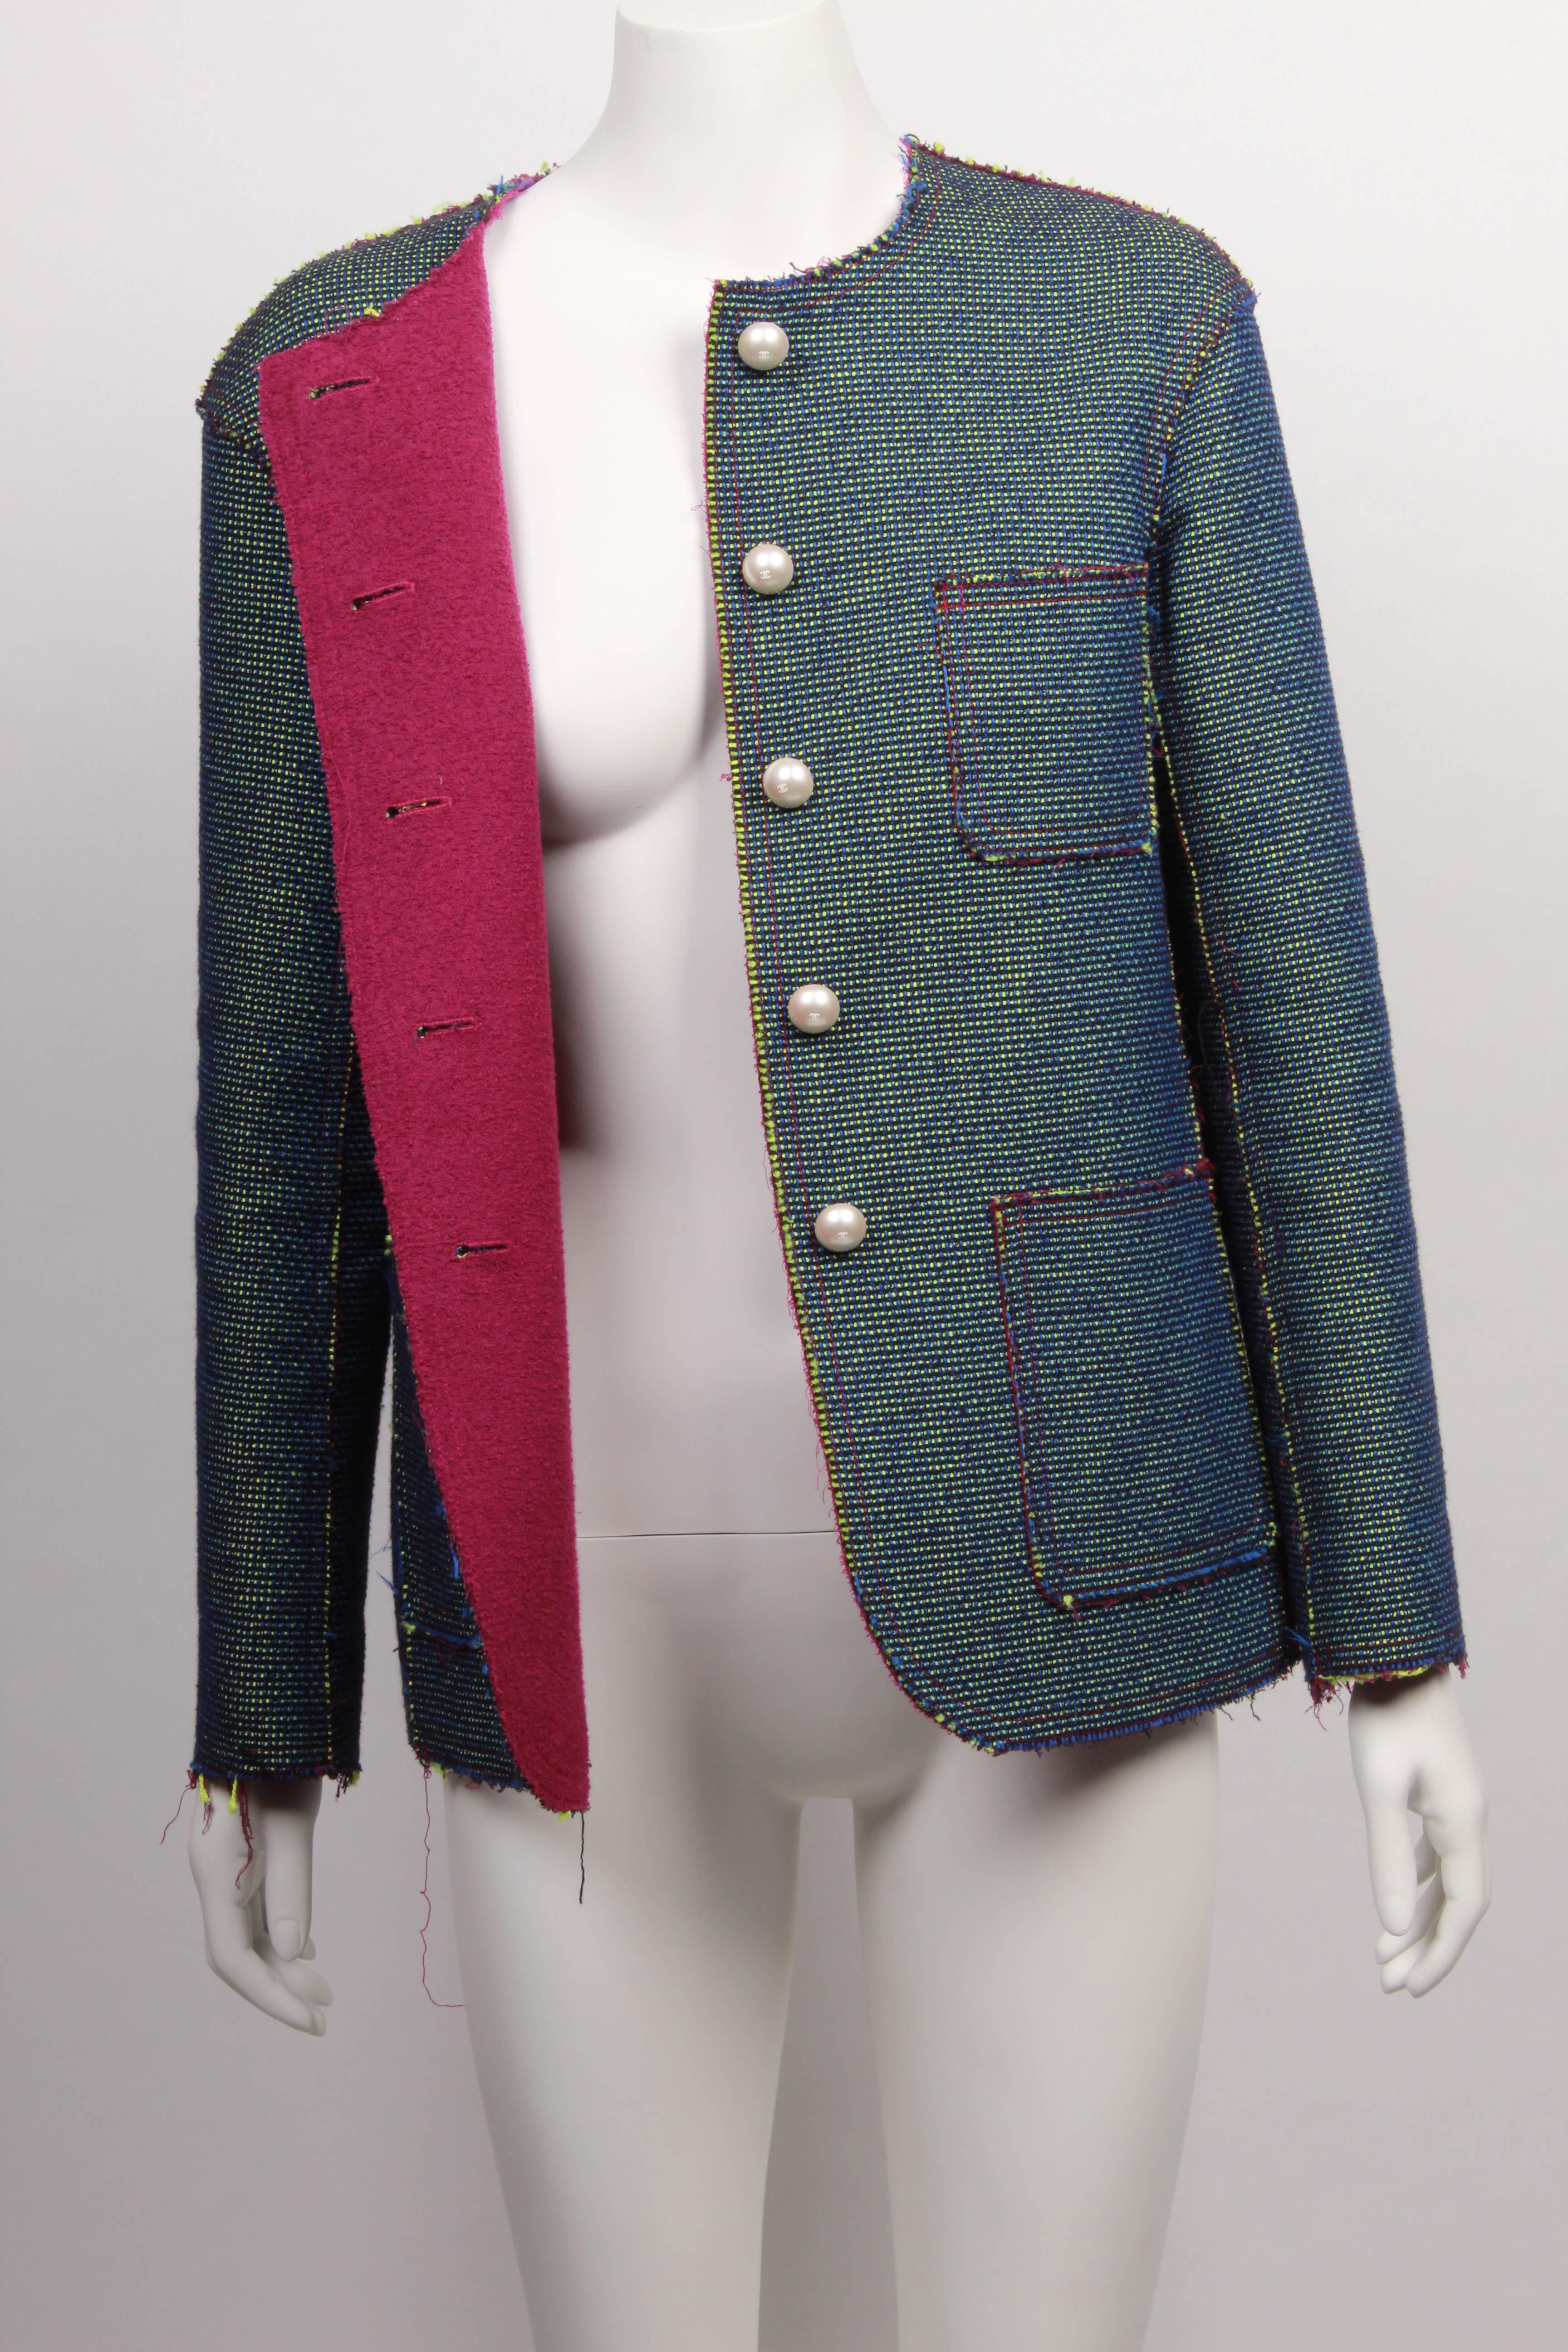 CHANEL Shot Colour Tweed Jacket In Excellent Condition In Melbourne, Victoria